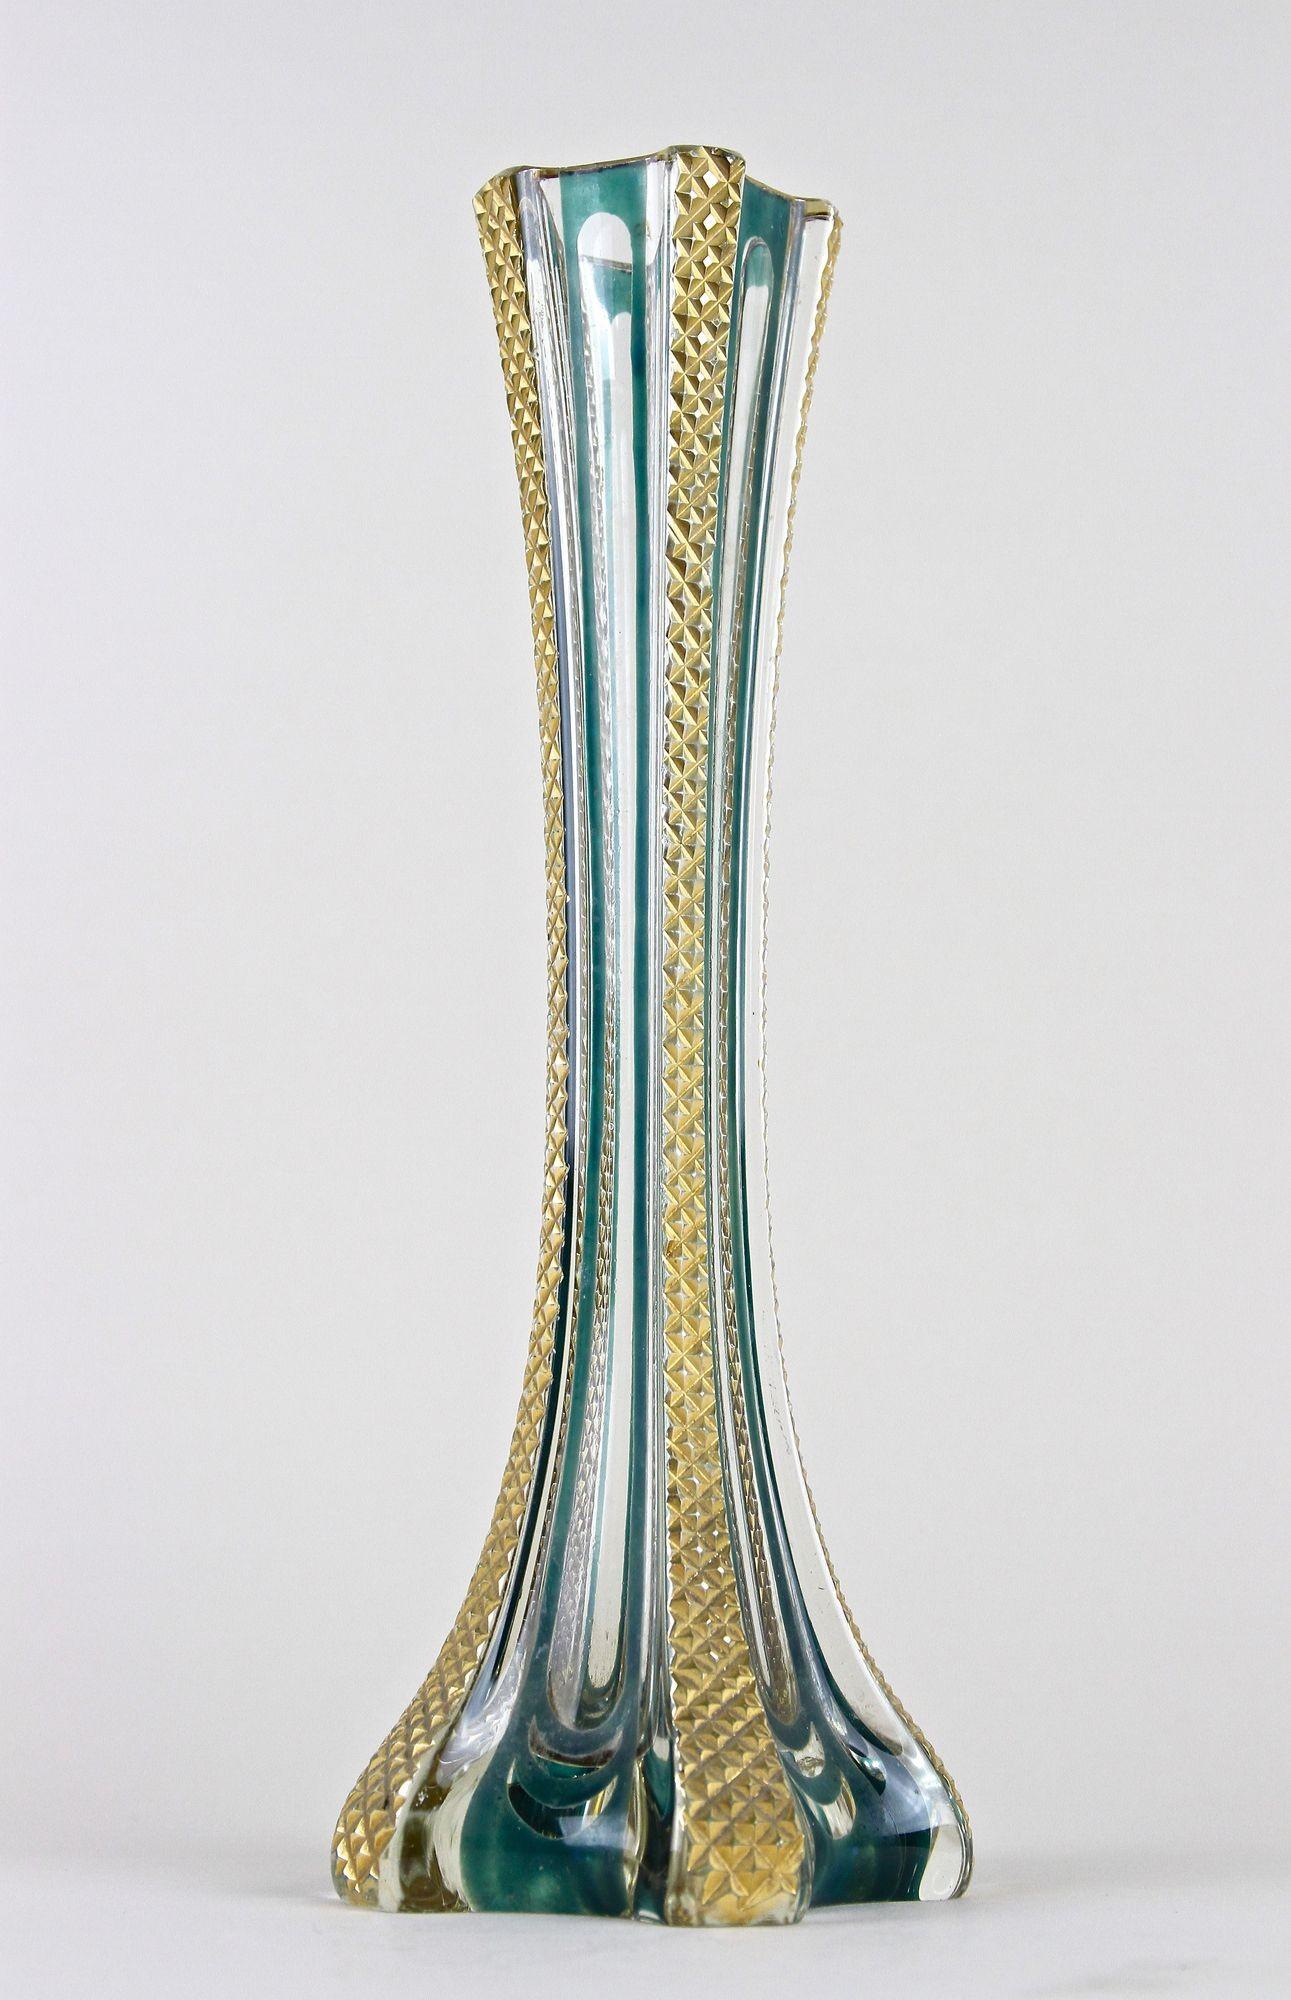 Murano Glass Vase With Gold Accents, Early 20th Century - Italy ca. 1930 For Sale 7